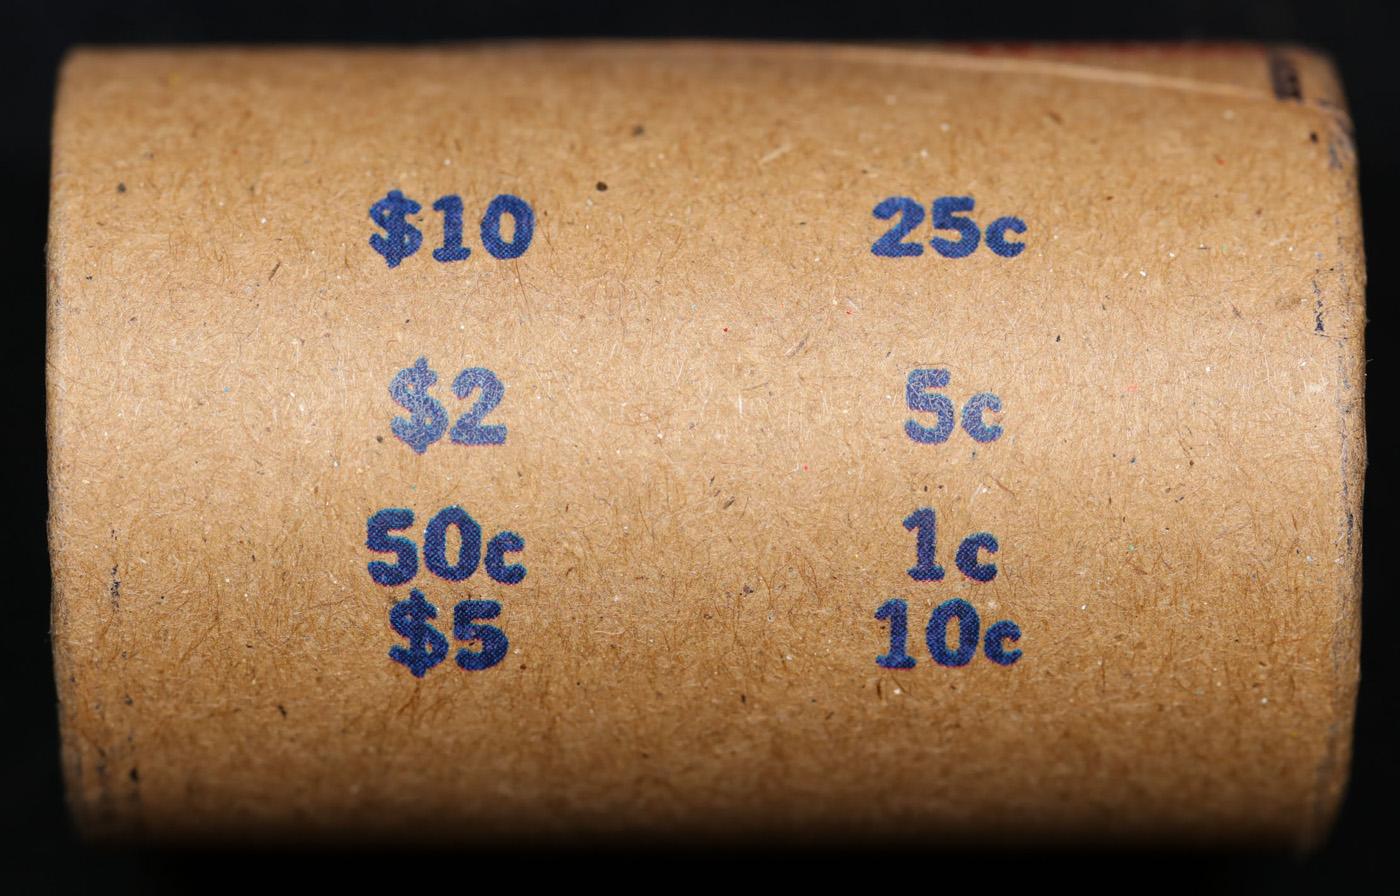 *EXCLUSIVE* Hand Marked "Unc Peace Extraordinary," x20 coin Covered End Roll! - Huge Vault Hoard  (F